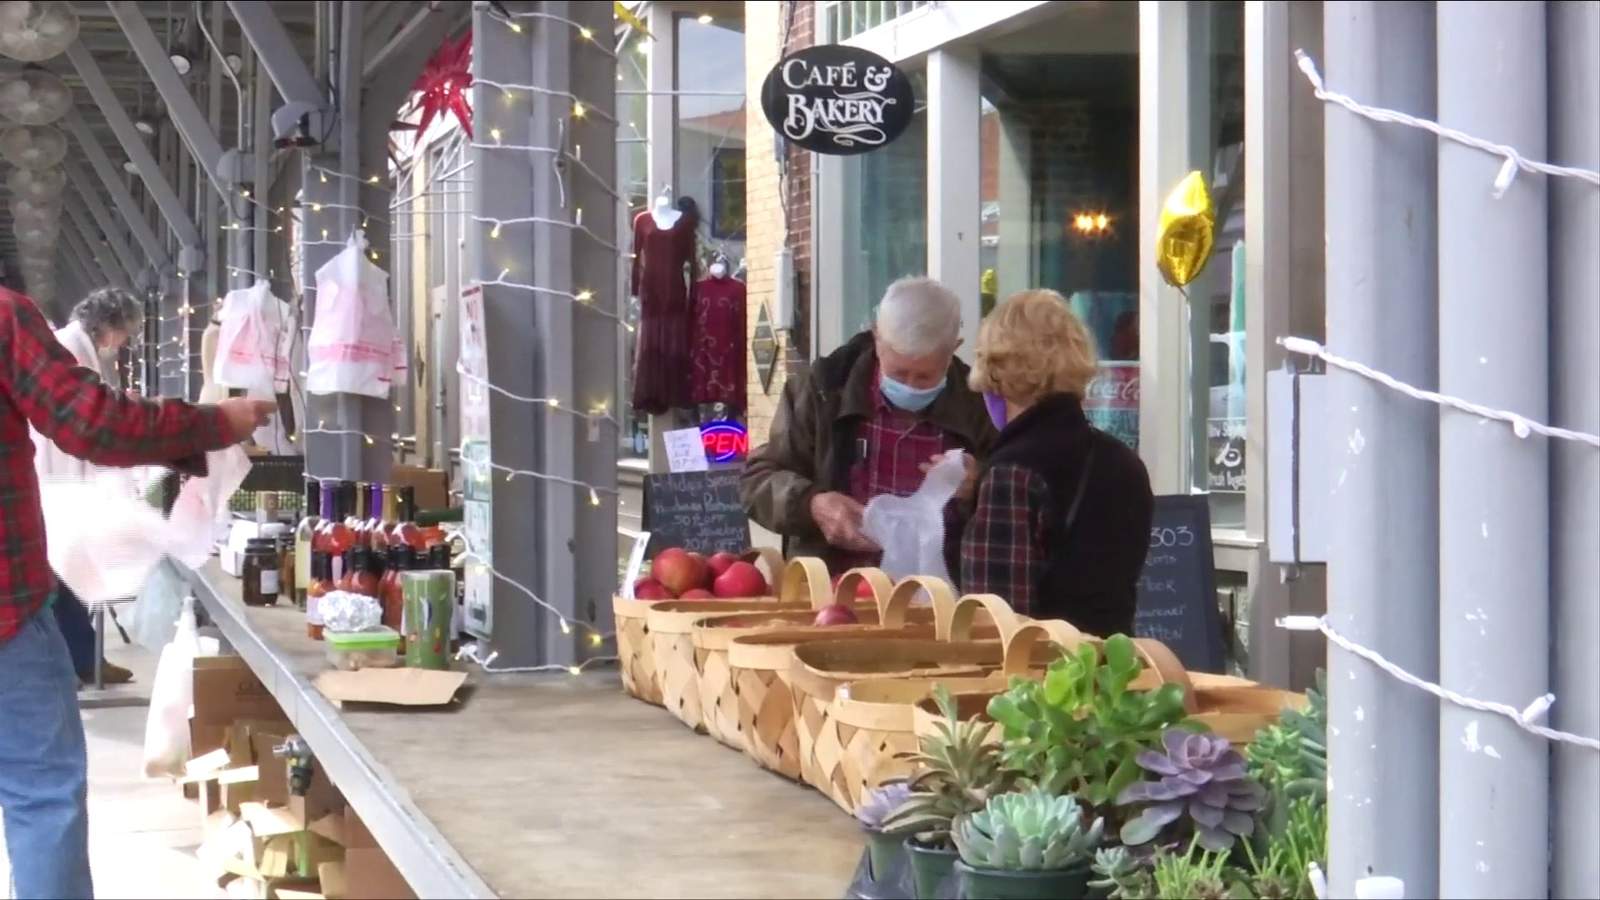 Downtown Roanoke business owners hopeful for Small Business Saturday turnout